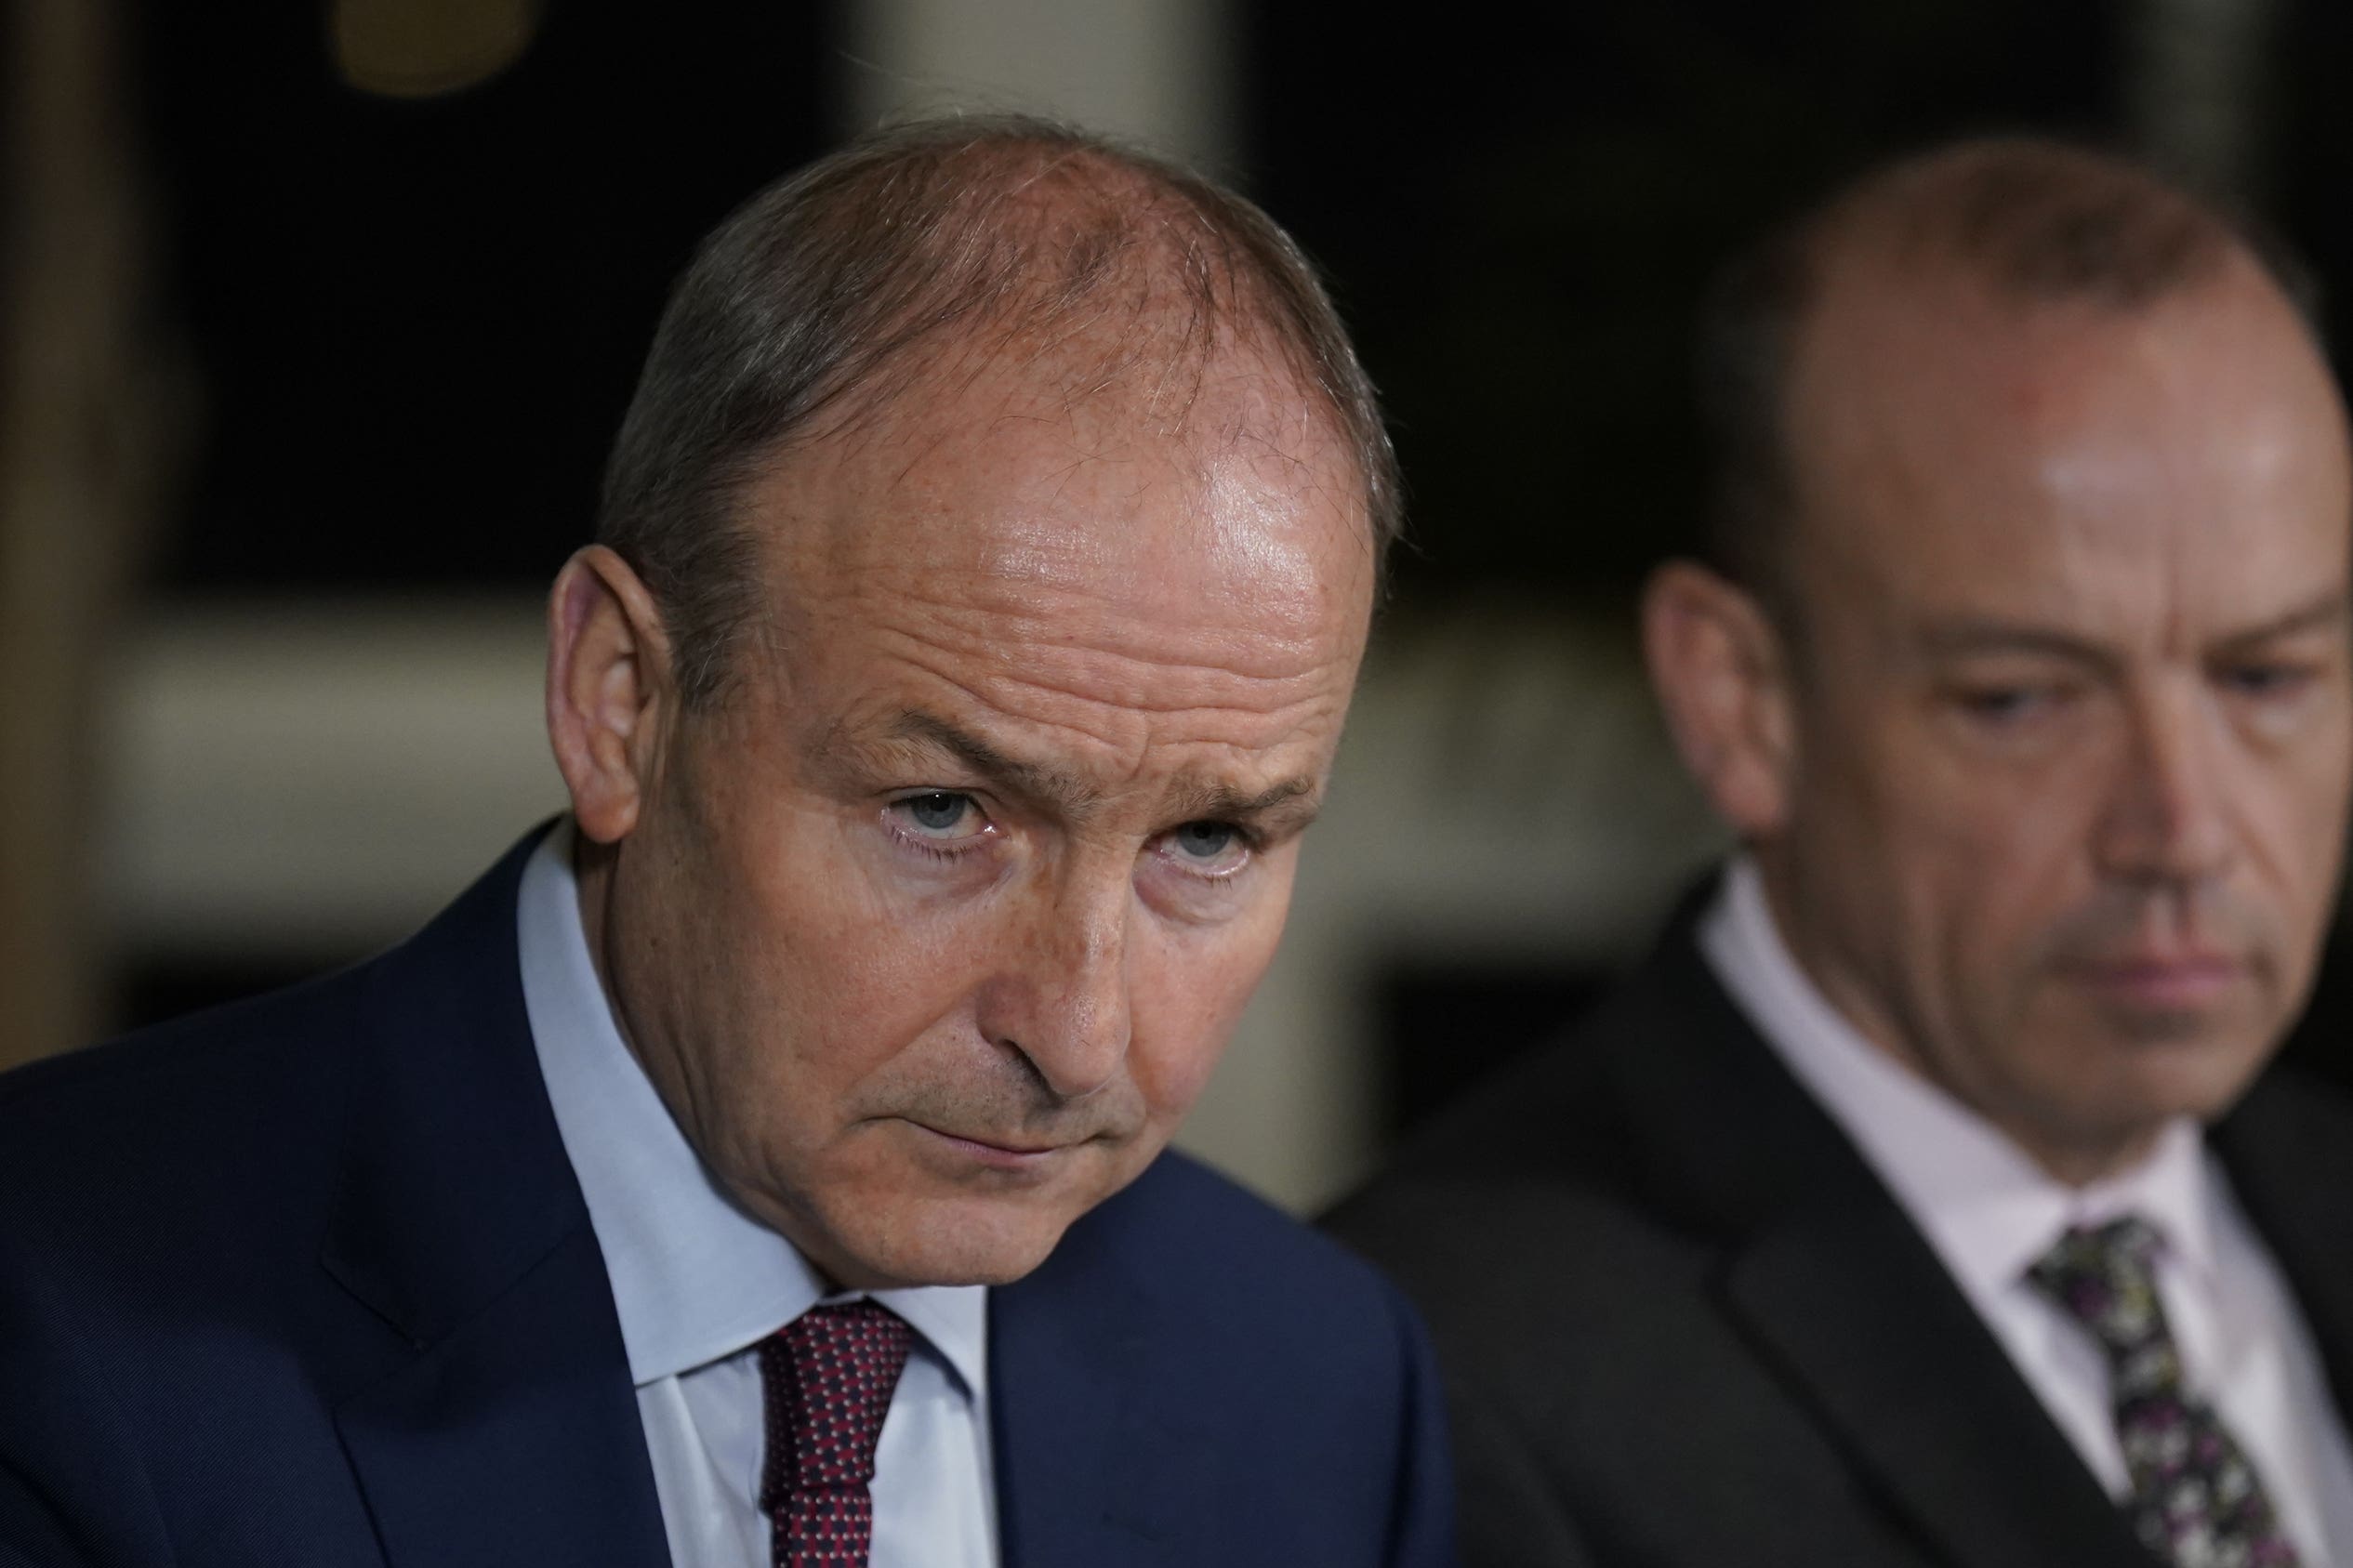 Ireland’s deputy prime minister Micheal Martin (left) and Northern Ireland secretary Chris Heaton-Harris at Farmleigh House, Dublin, during the British-Irish Intergovernmental Conference earlier this year